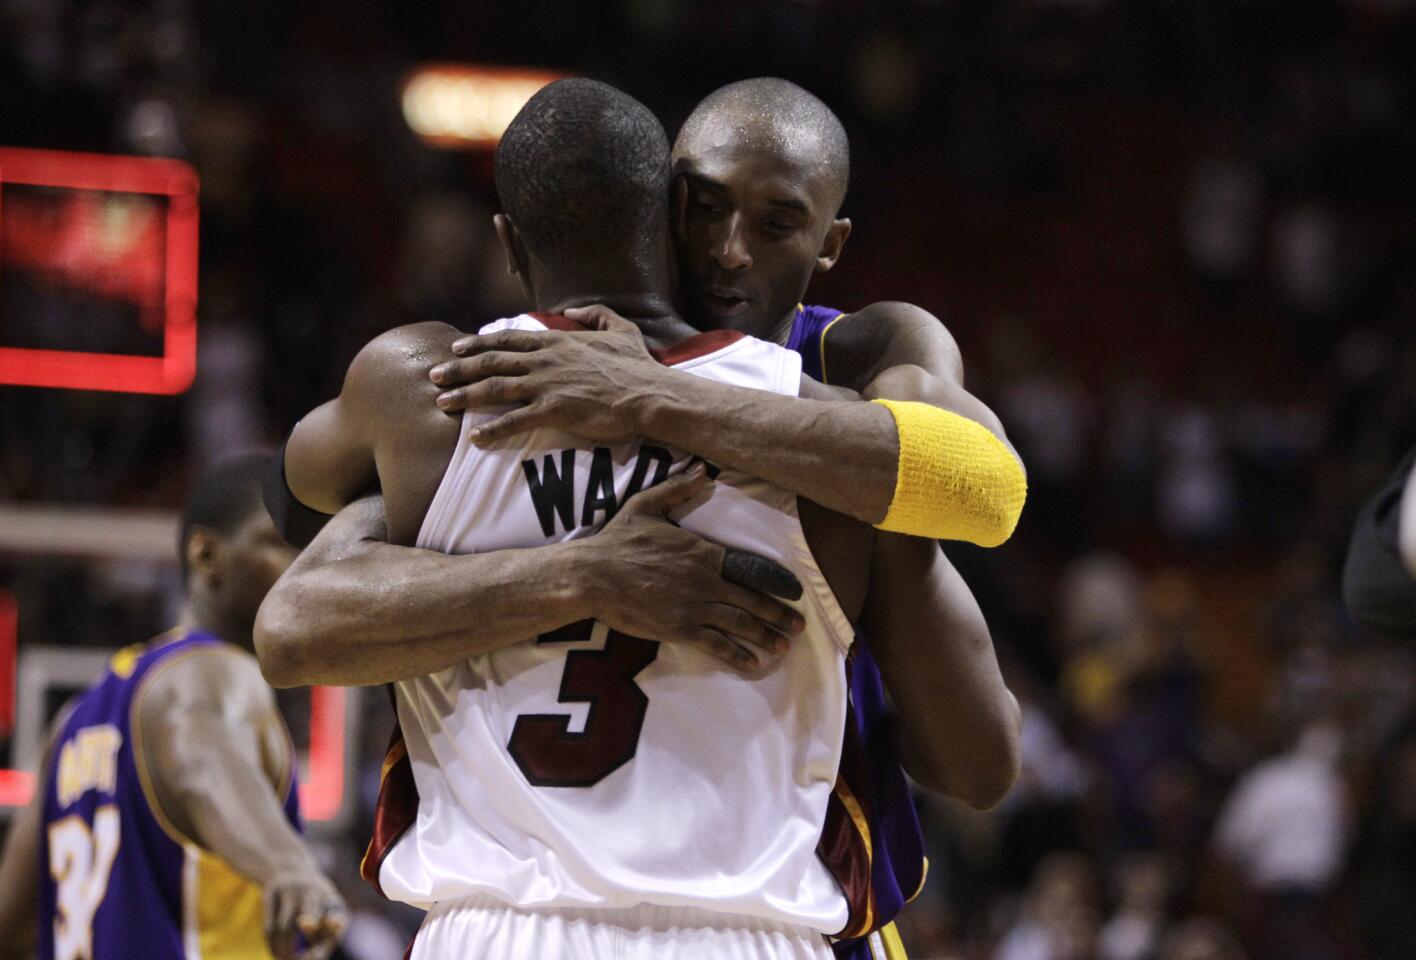 Miami Heat guard Dwyane Wade (3) is hugged by Los Angeles Lakers guard Kobe Bryant following an NBA basketball game in Miami, Thursday, March 4, 2010. (AP Photo/Lynne Sladky)